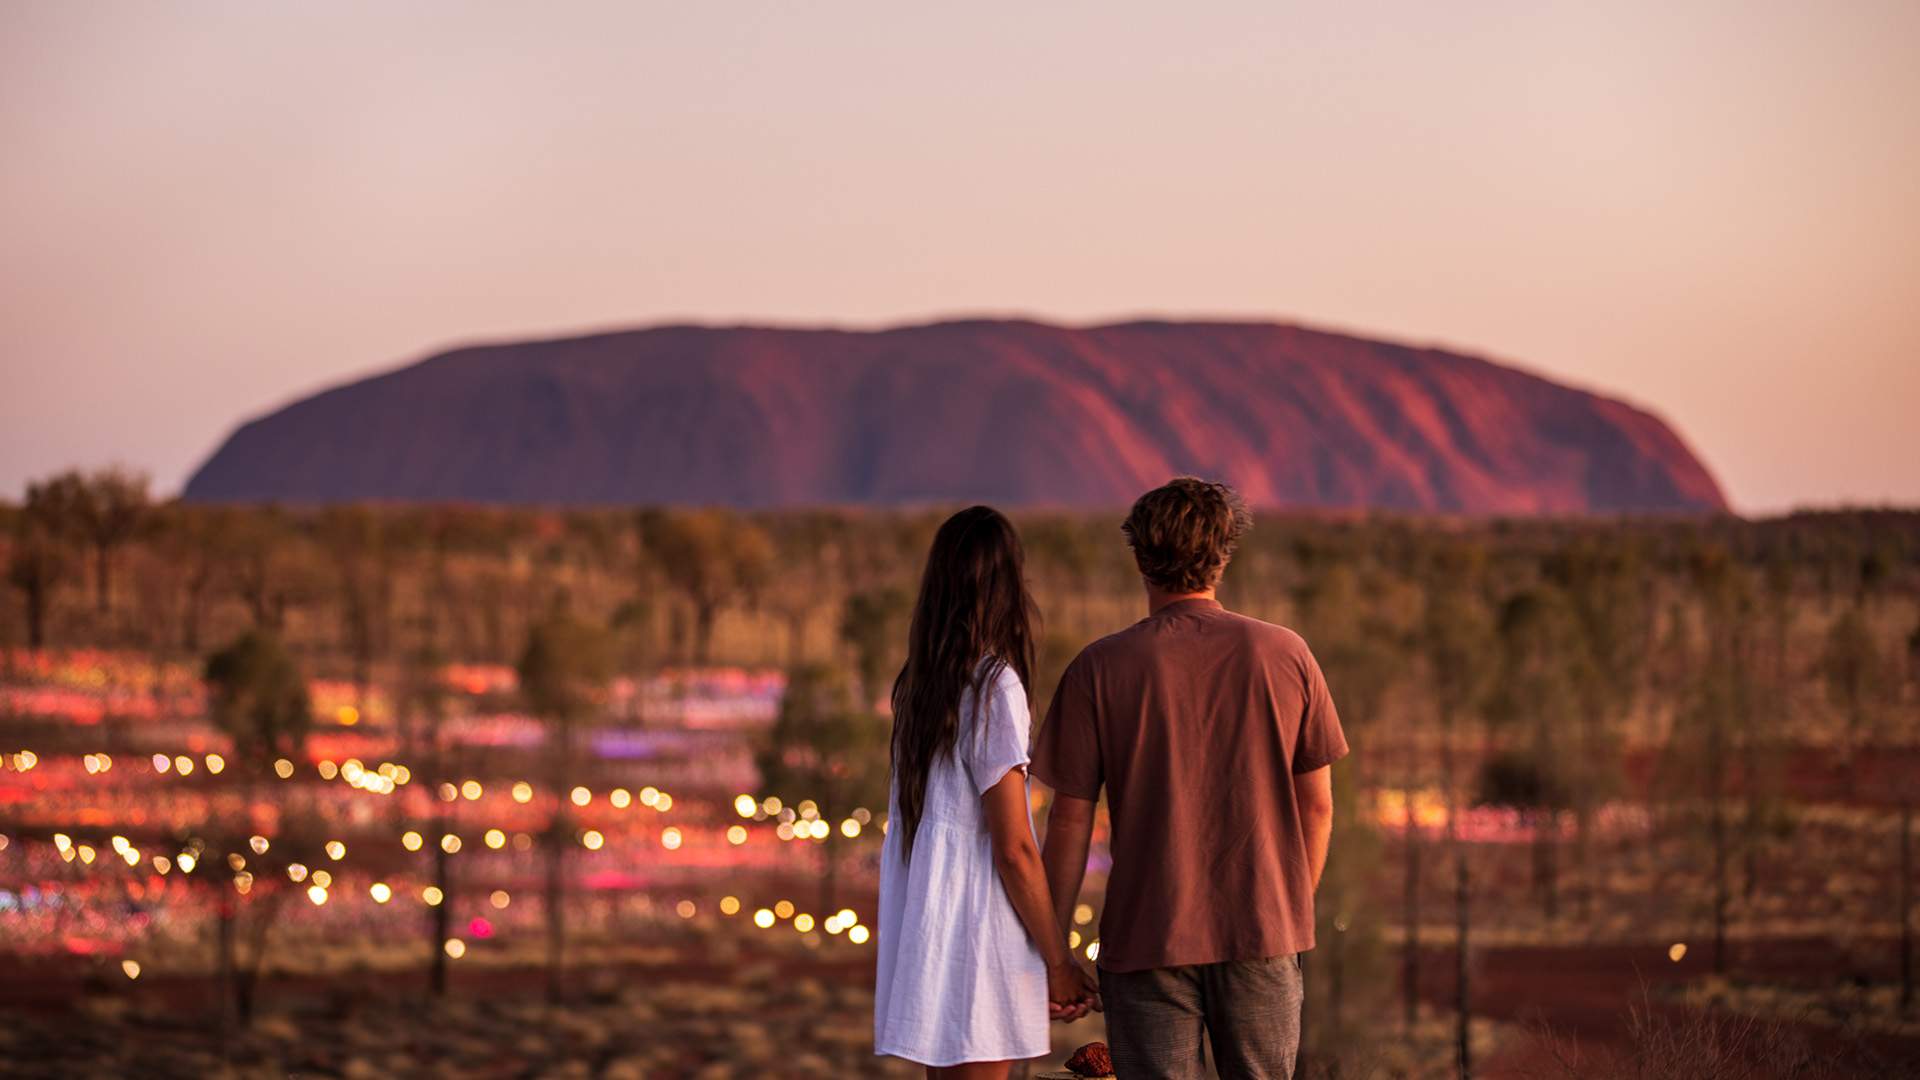 Webjet's Latest Big Sale on Northern Territory Flights Is Slinging One-Way Fares From Just $18